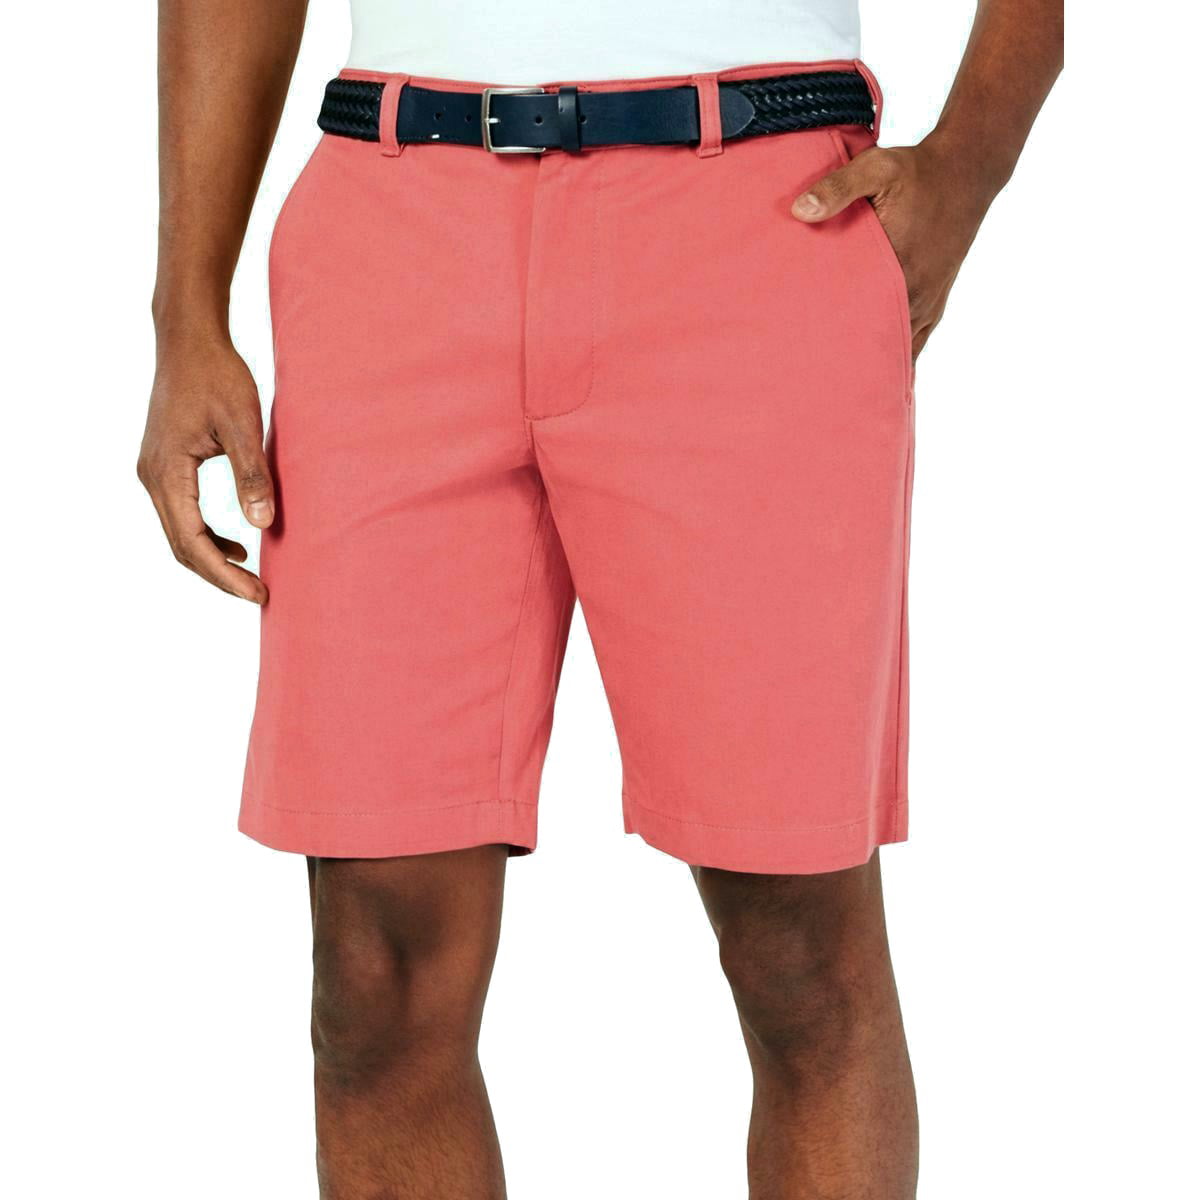 Club Room Mens Embroidered Casual Bermuda Shorts 